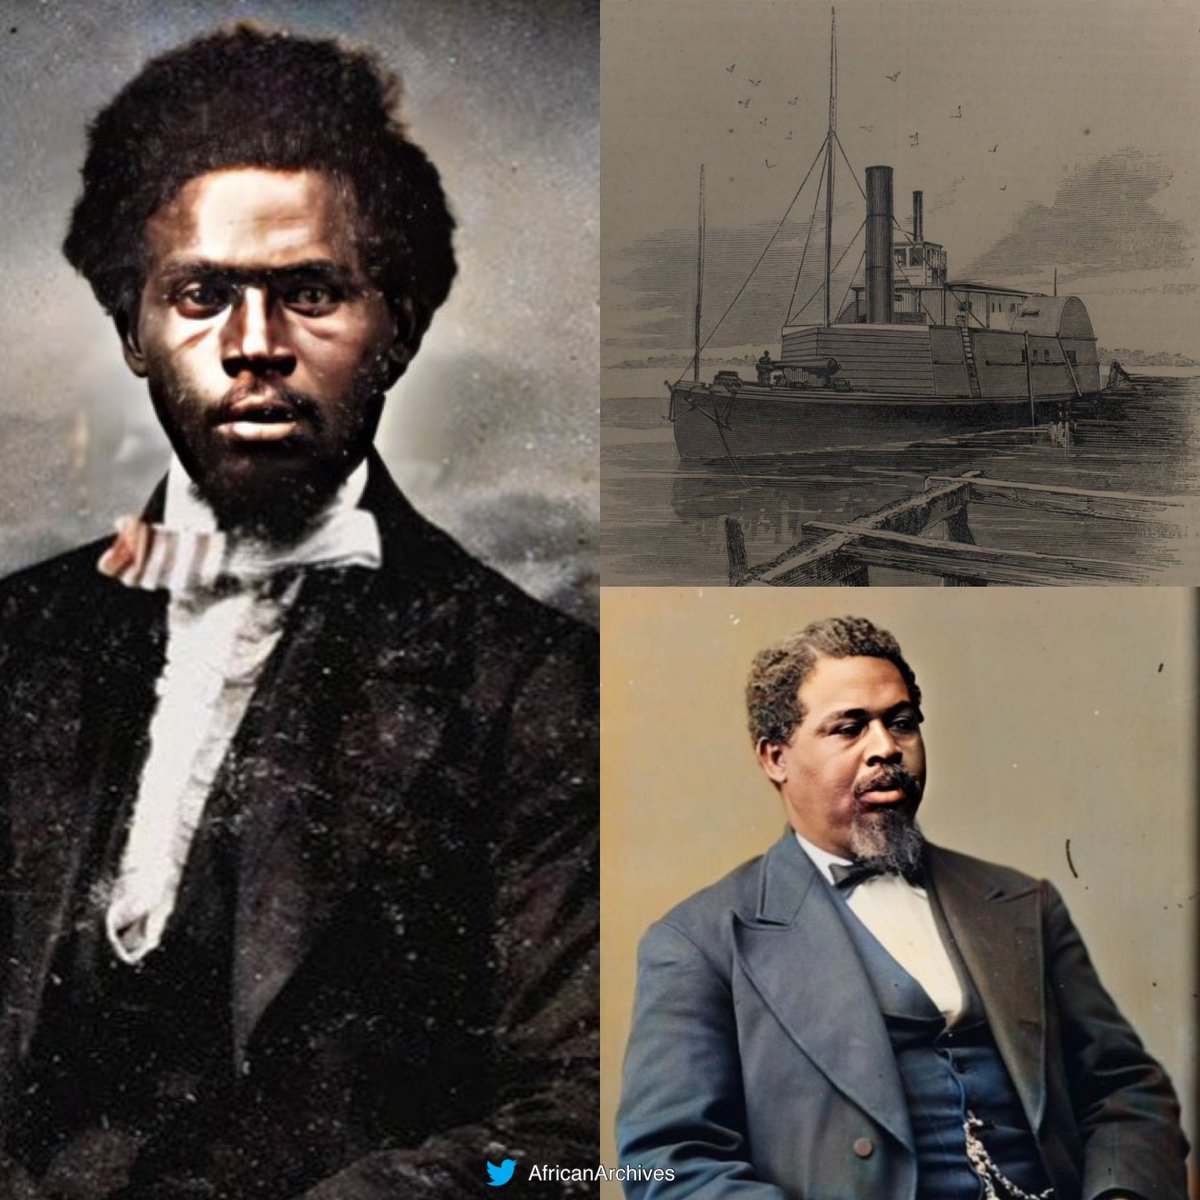 In 1862, Robert Smalls stole a Confederate Ship and sailed it to Freedom disguised as a captain, freeing his crew and their families. #BlackHistoryMonth A THREAD!